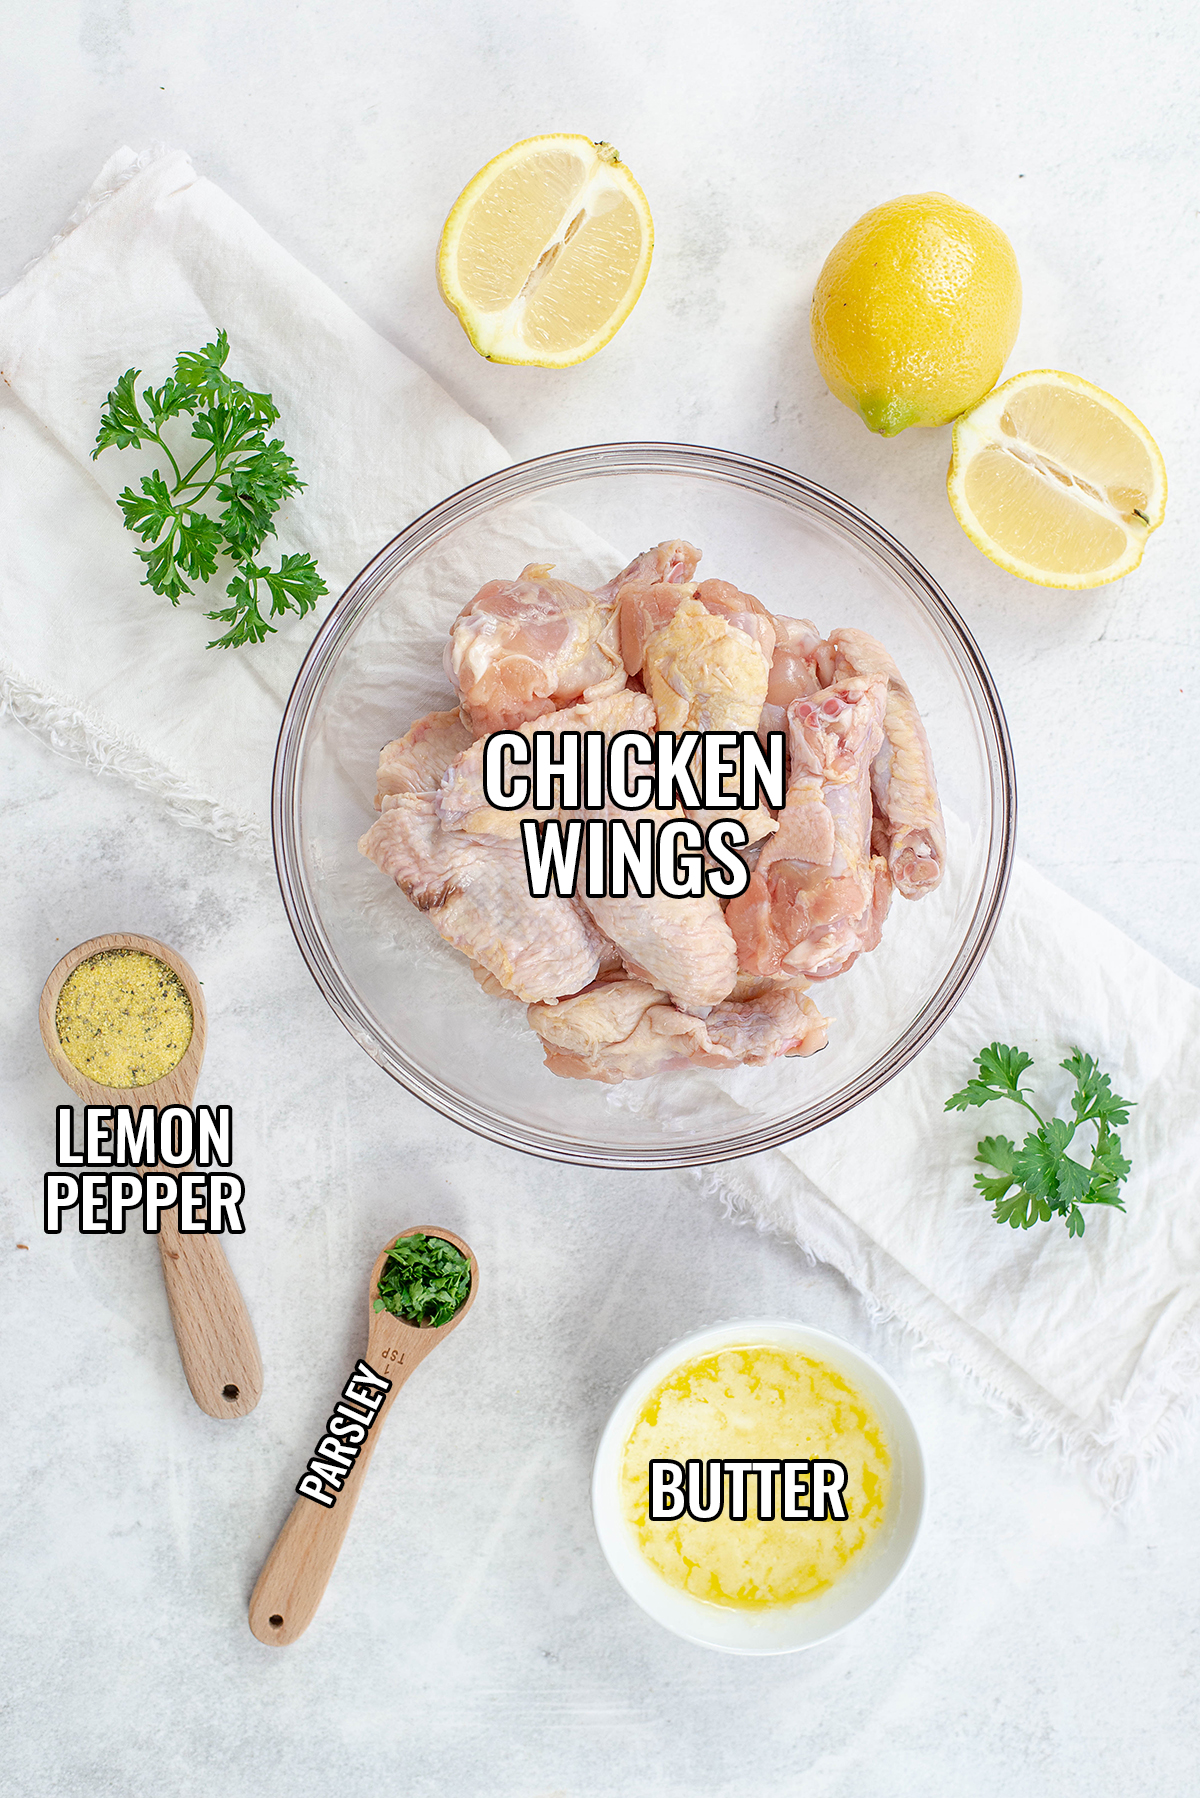 Lemon pepper chicken wing ingredients spread out on a counter.